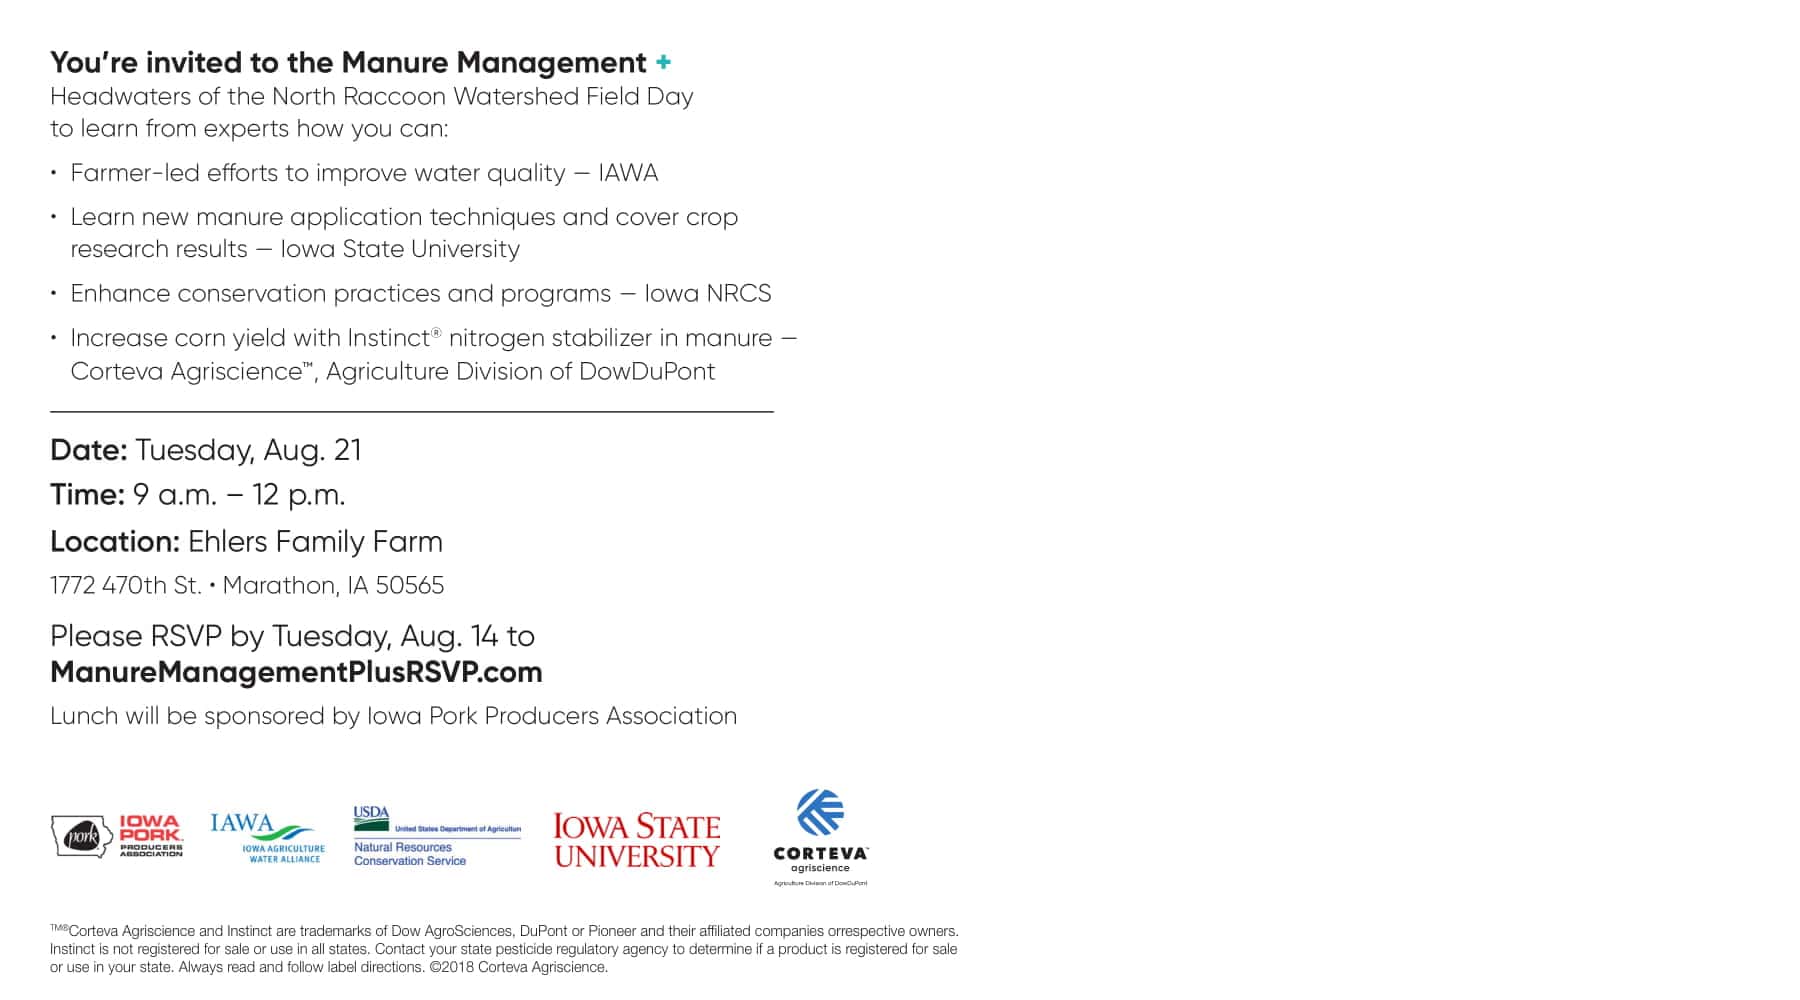 "You're Invited" to this Manure Management Plus field day flyer in the Headwaters of the North Raccoon